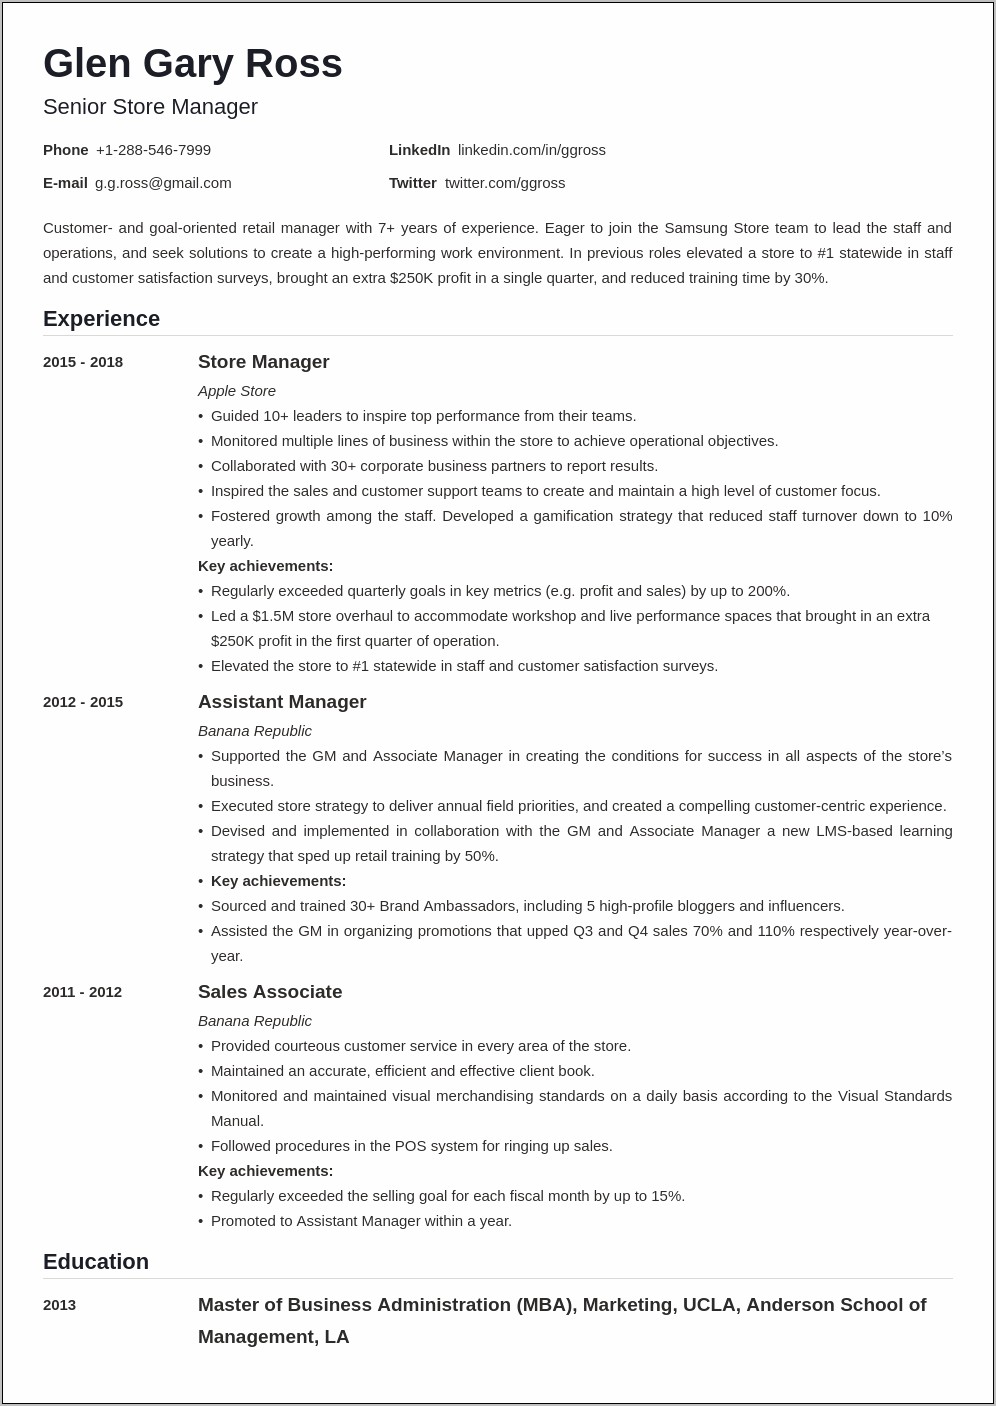 Resume Experience Examples For Retail